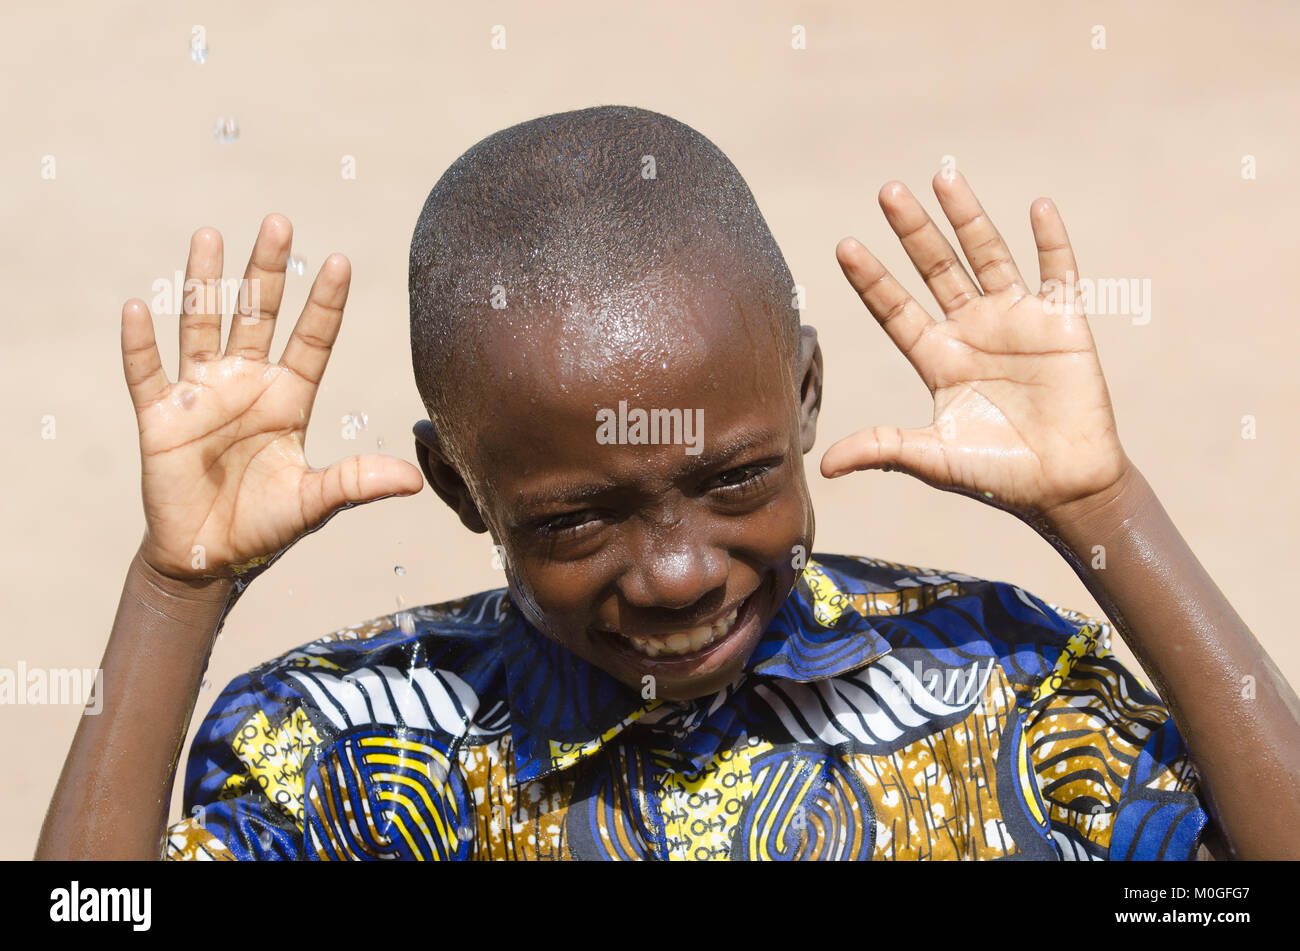 Handsome Young Boy Showing Hands Laughing Outdoors Stock Photo - Alamy